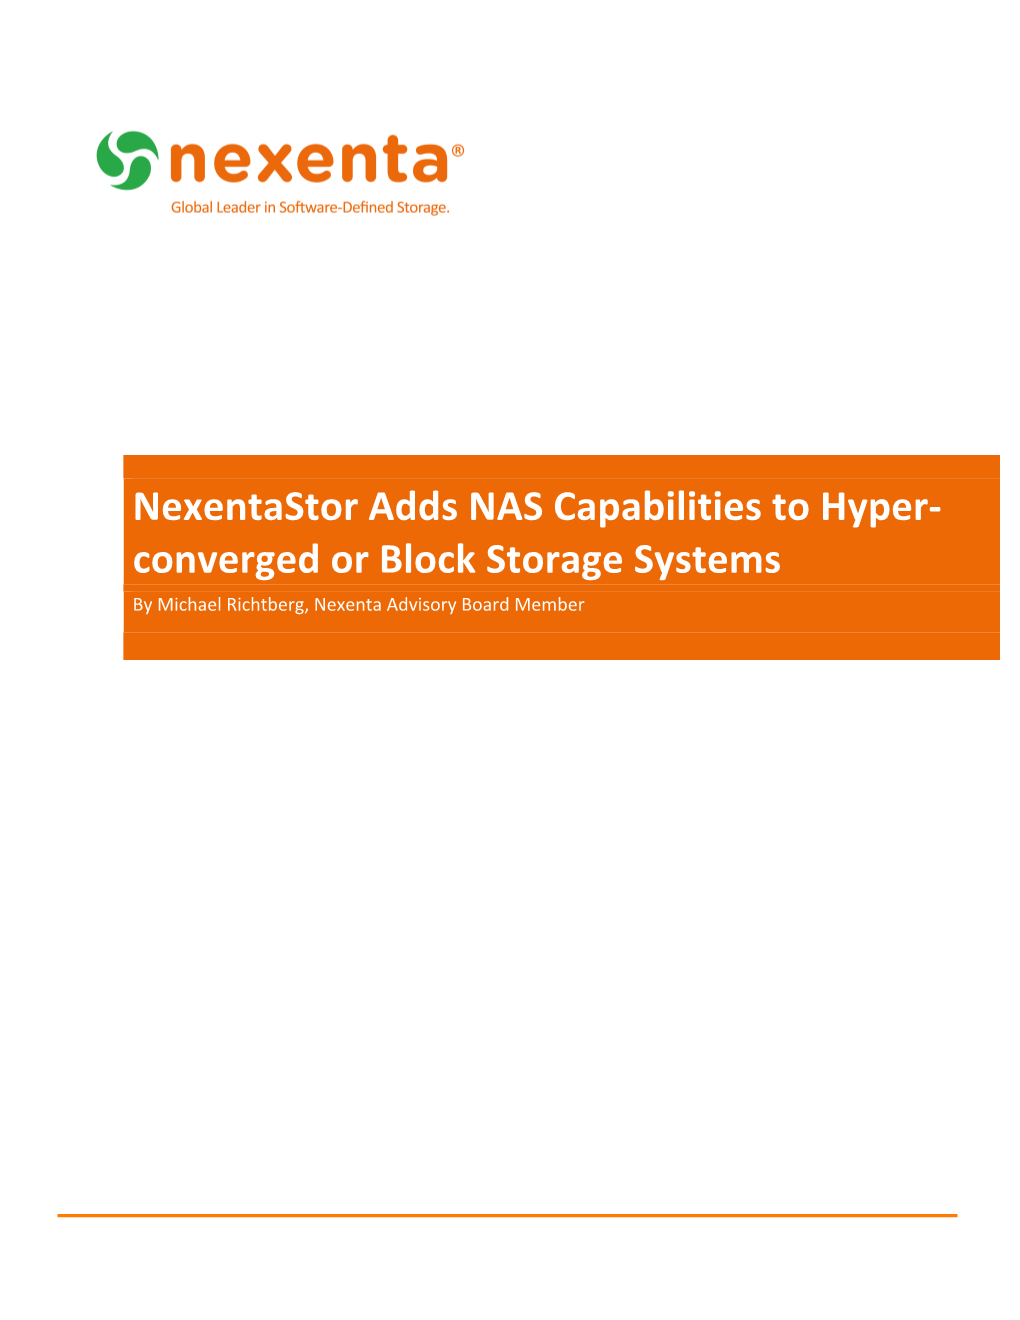 Nexentastor Adds NAS Capabilities to Hyper- Converged Or Block Storage Systems Title by Michael Richtberg, Nexenta Advisory Board Member Subtitle